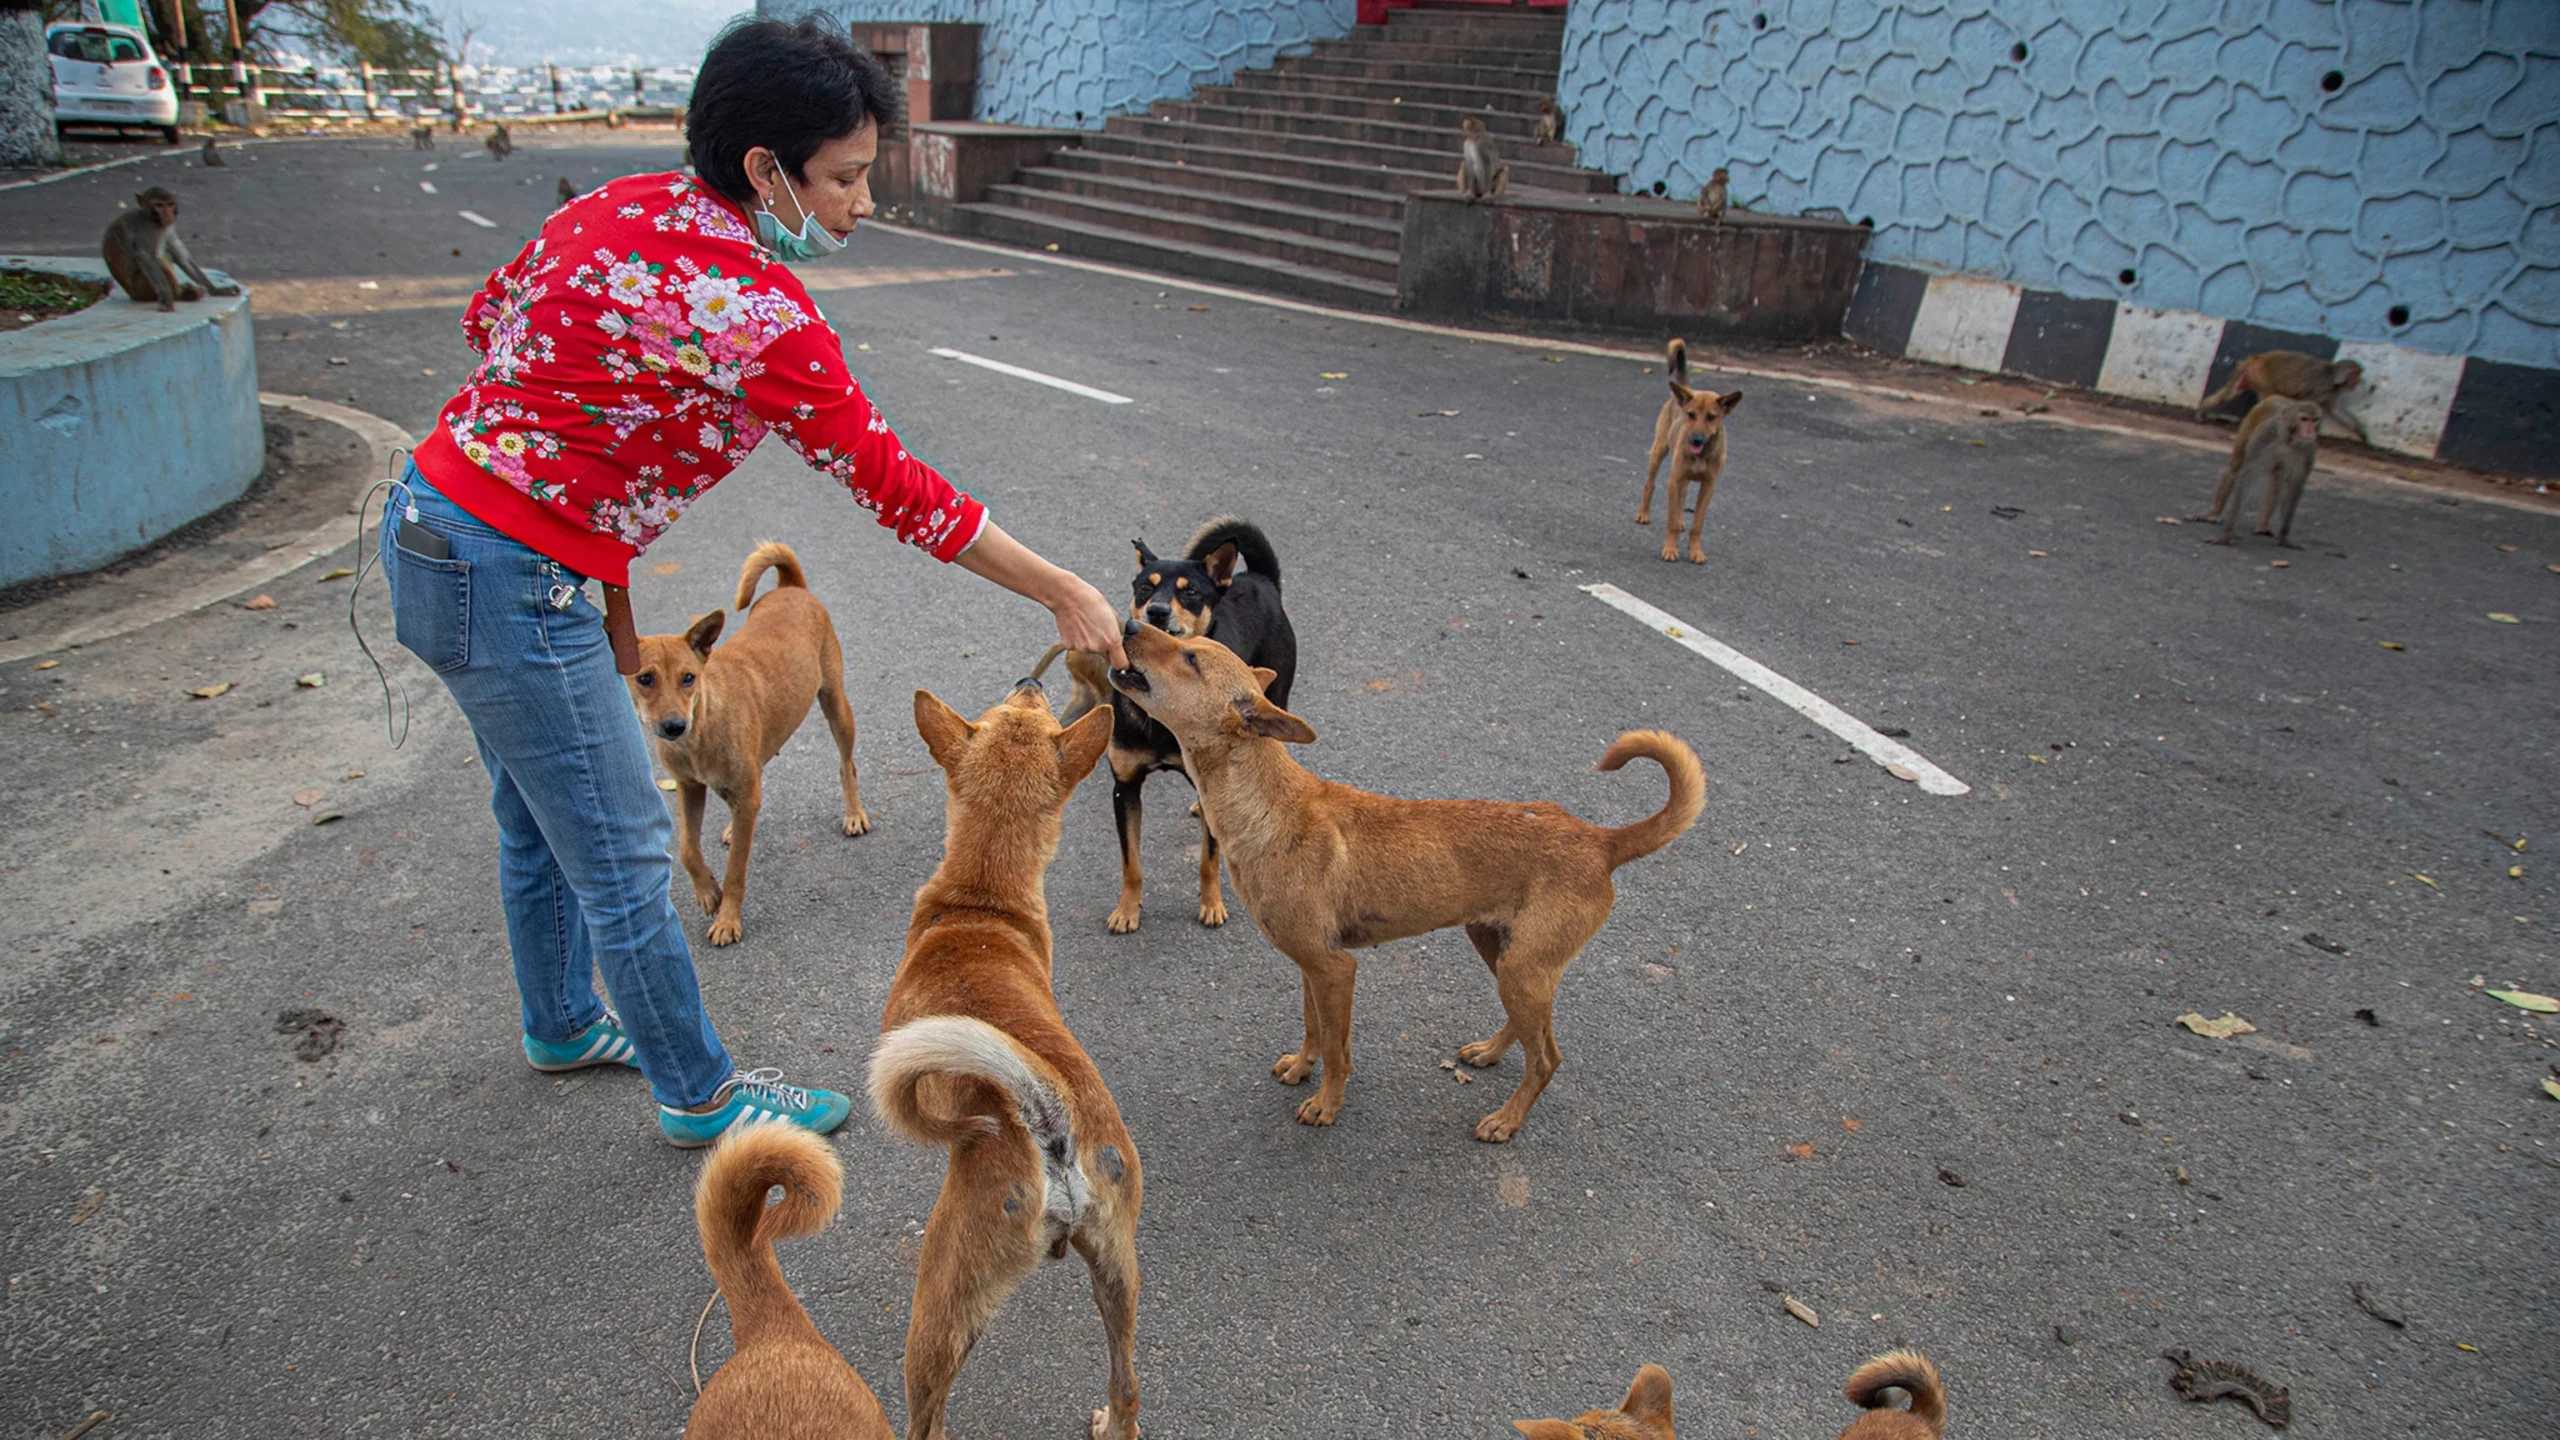 Dogs extremely popular during corona crisis